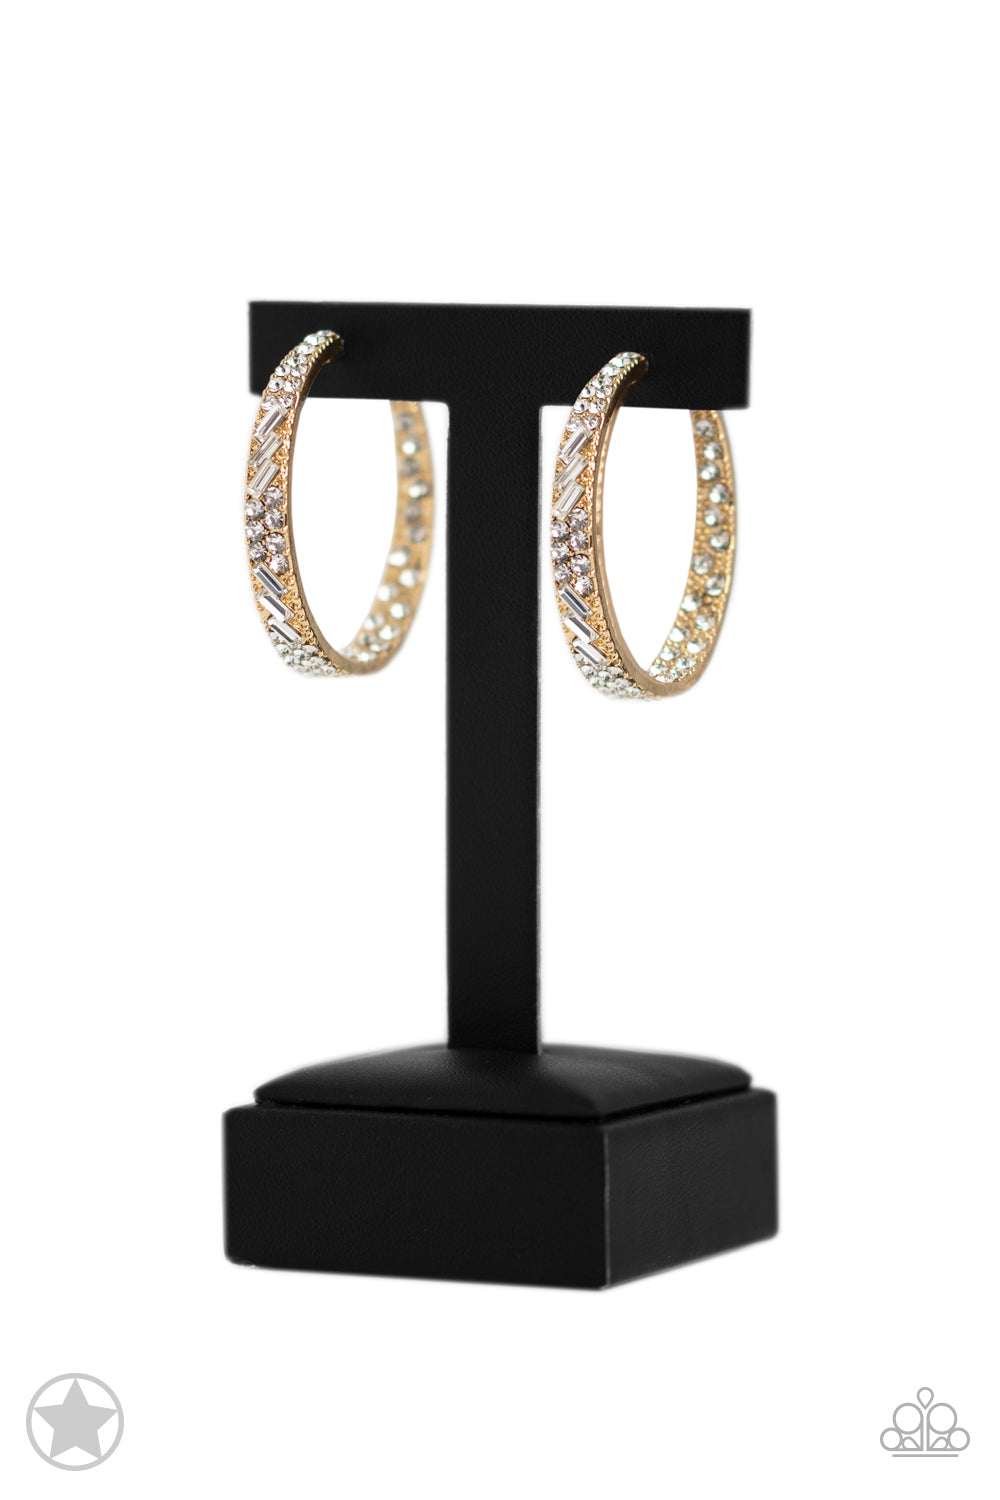 Paparazzi Earrings GLITZY By Association Gold Hoop. #P5HO-GDXX-299XX. Get Free Shipping.